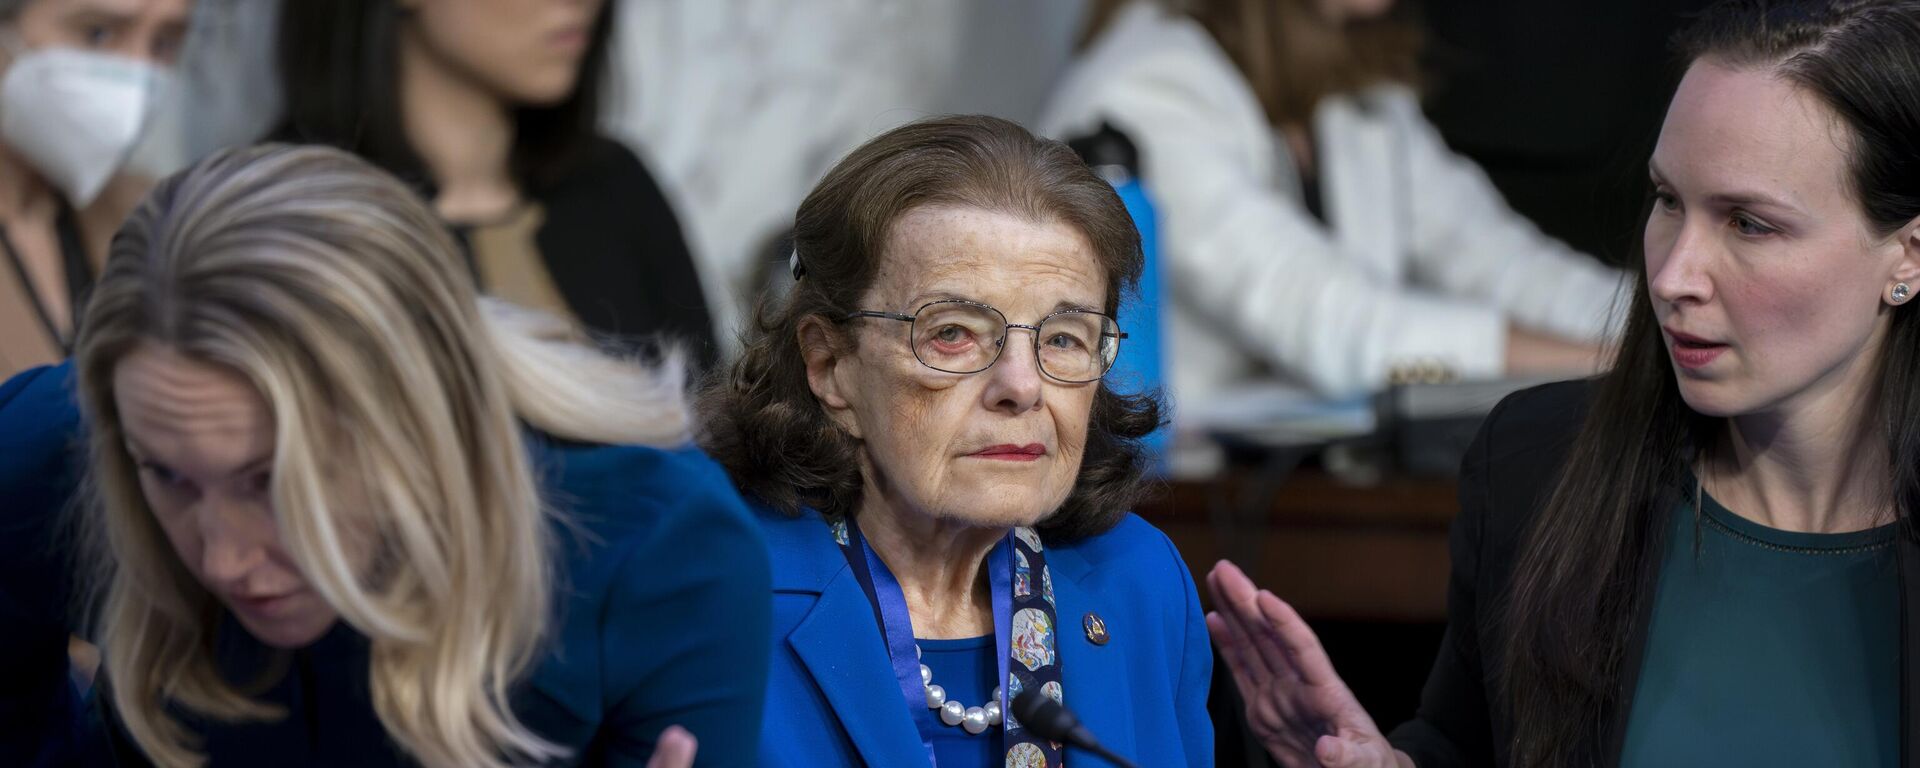 Sen. Dianne Feinstein, D-Calif., is flanked by aides as she returns to the Senate Judiciary Committee following a more than two-month absence - Sputnik International, 1920, 17.05.2023